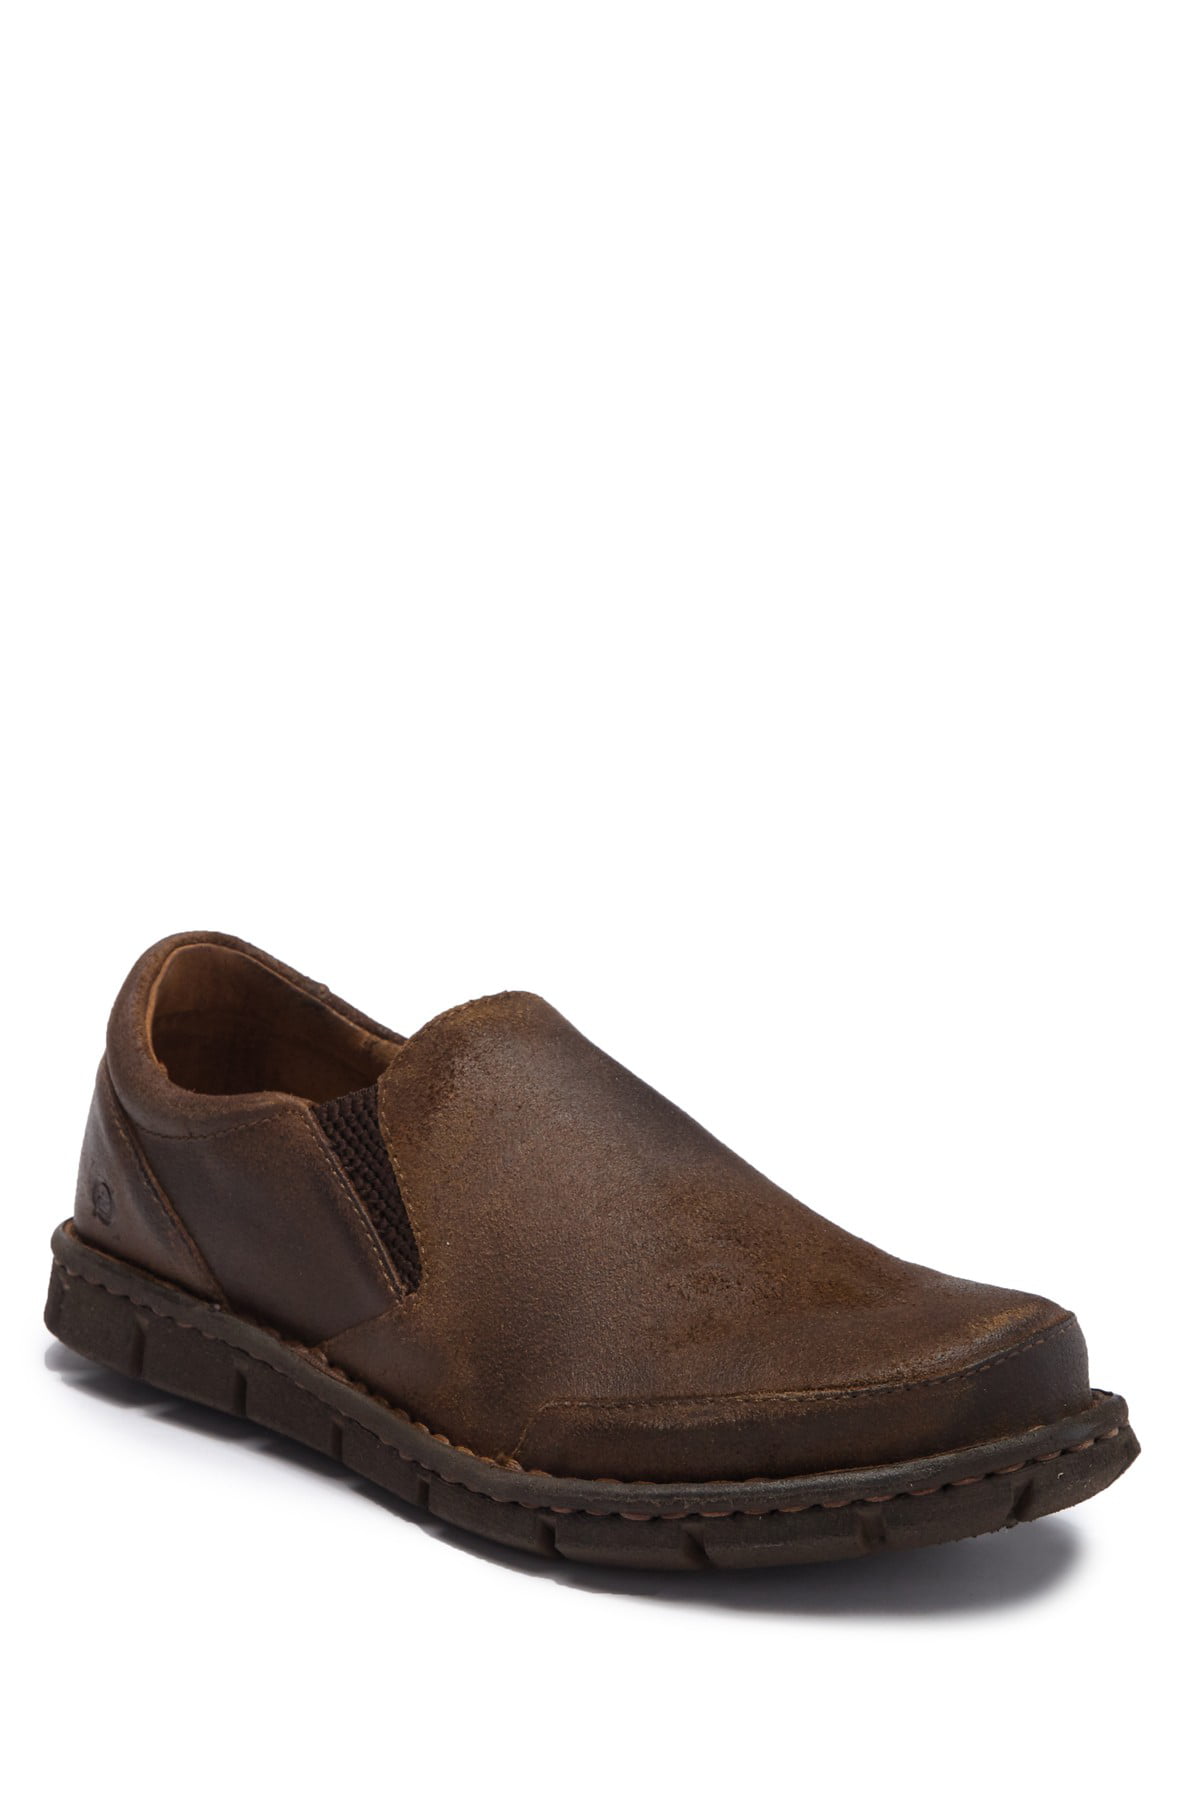 born stan loafer